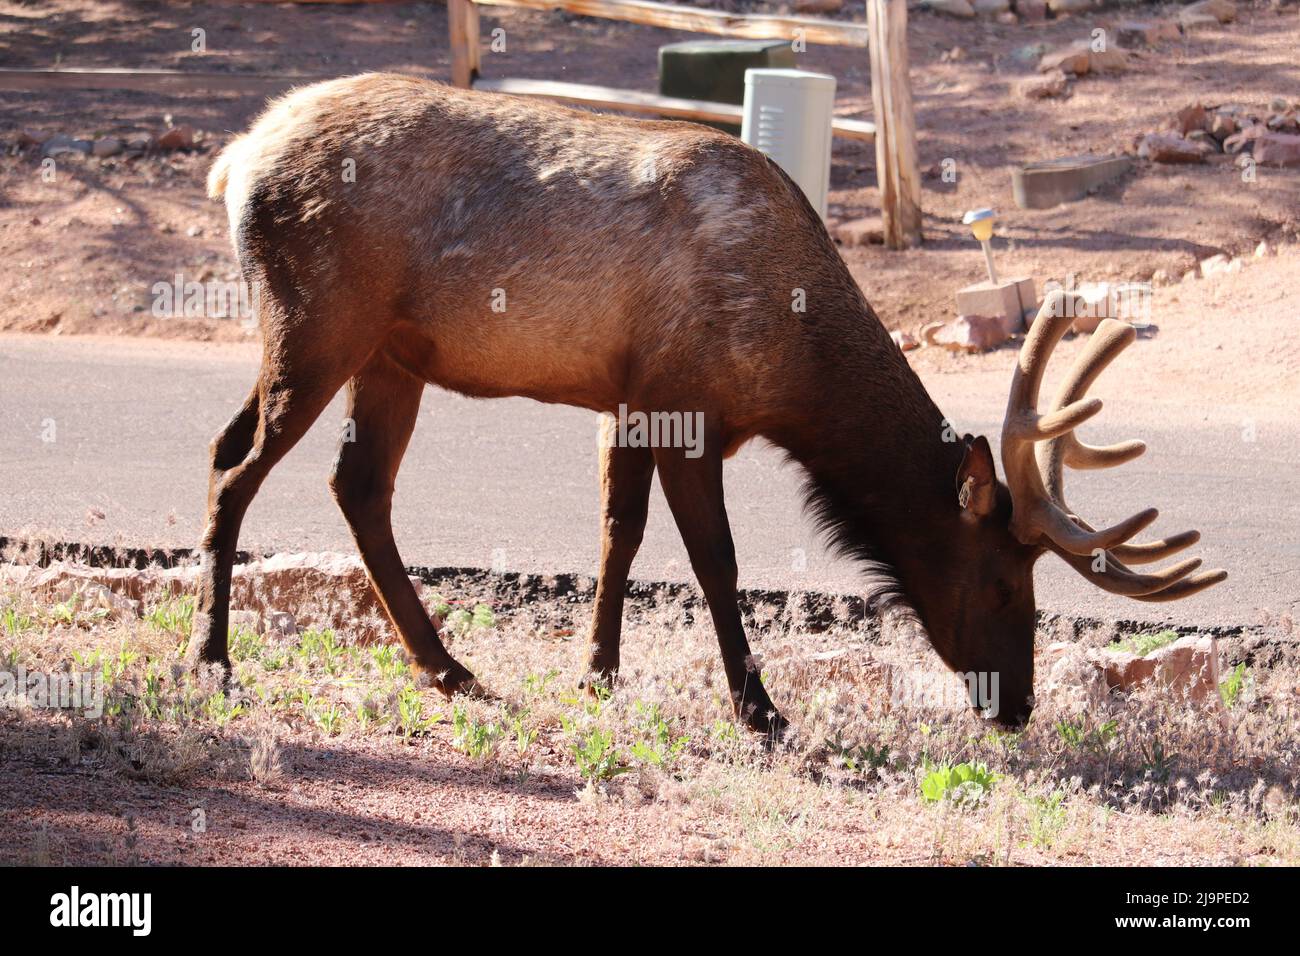 Male elk or Cervus canadensis feeding on some grass in a neighbor's yard in Payson, Arizona. Stock Photo